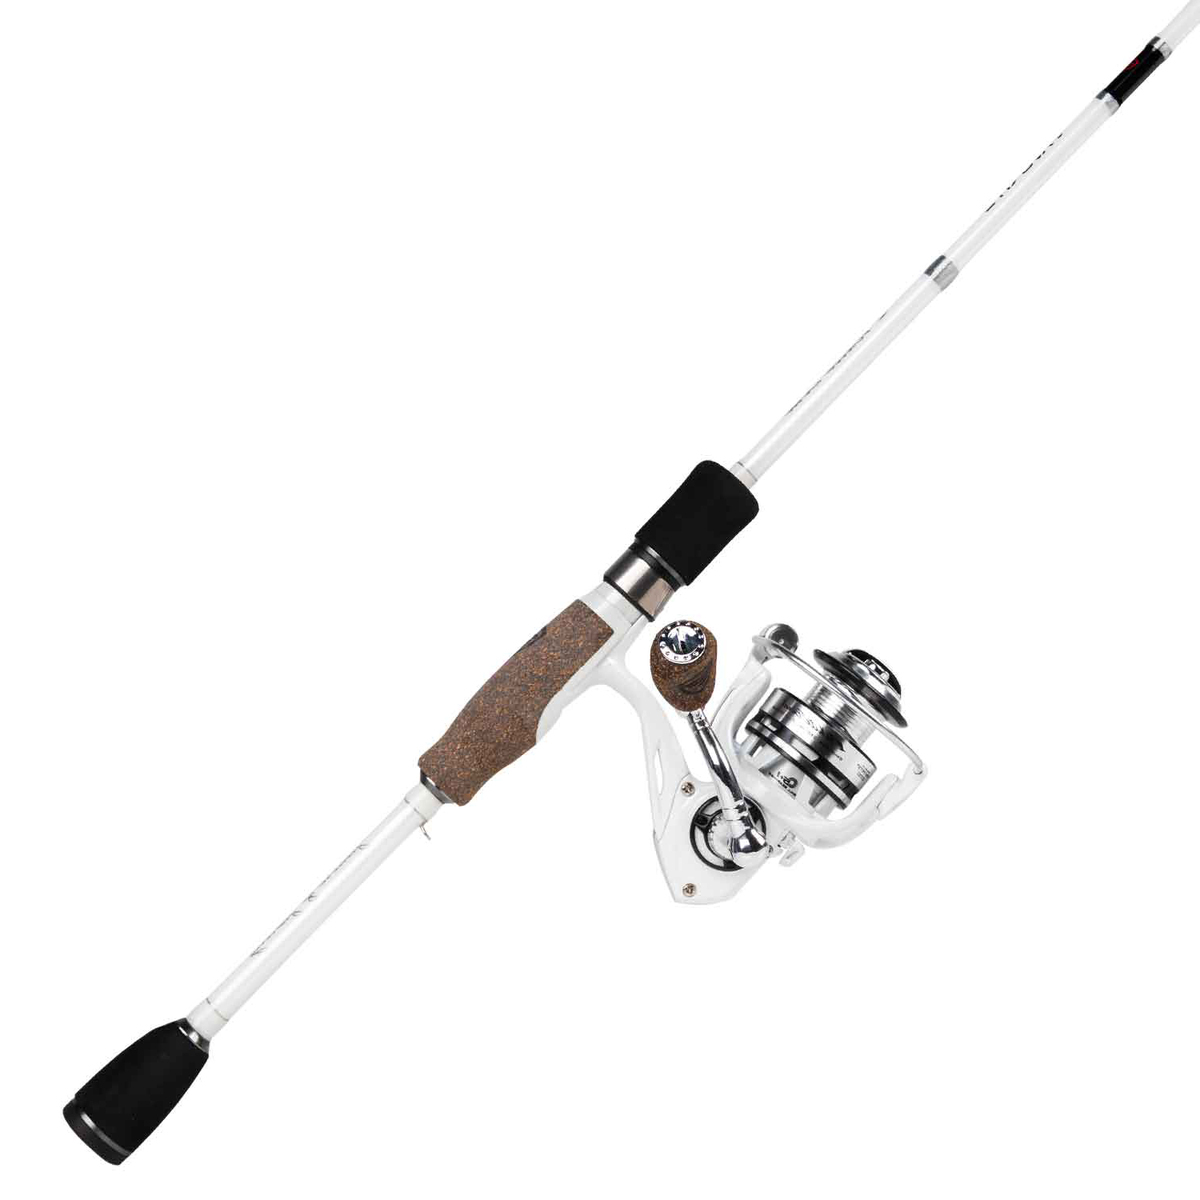 ProFISHiency White Spinning Rod and Reel Combo